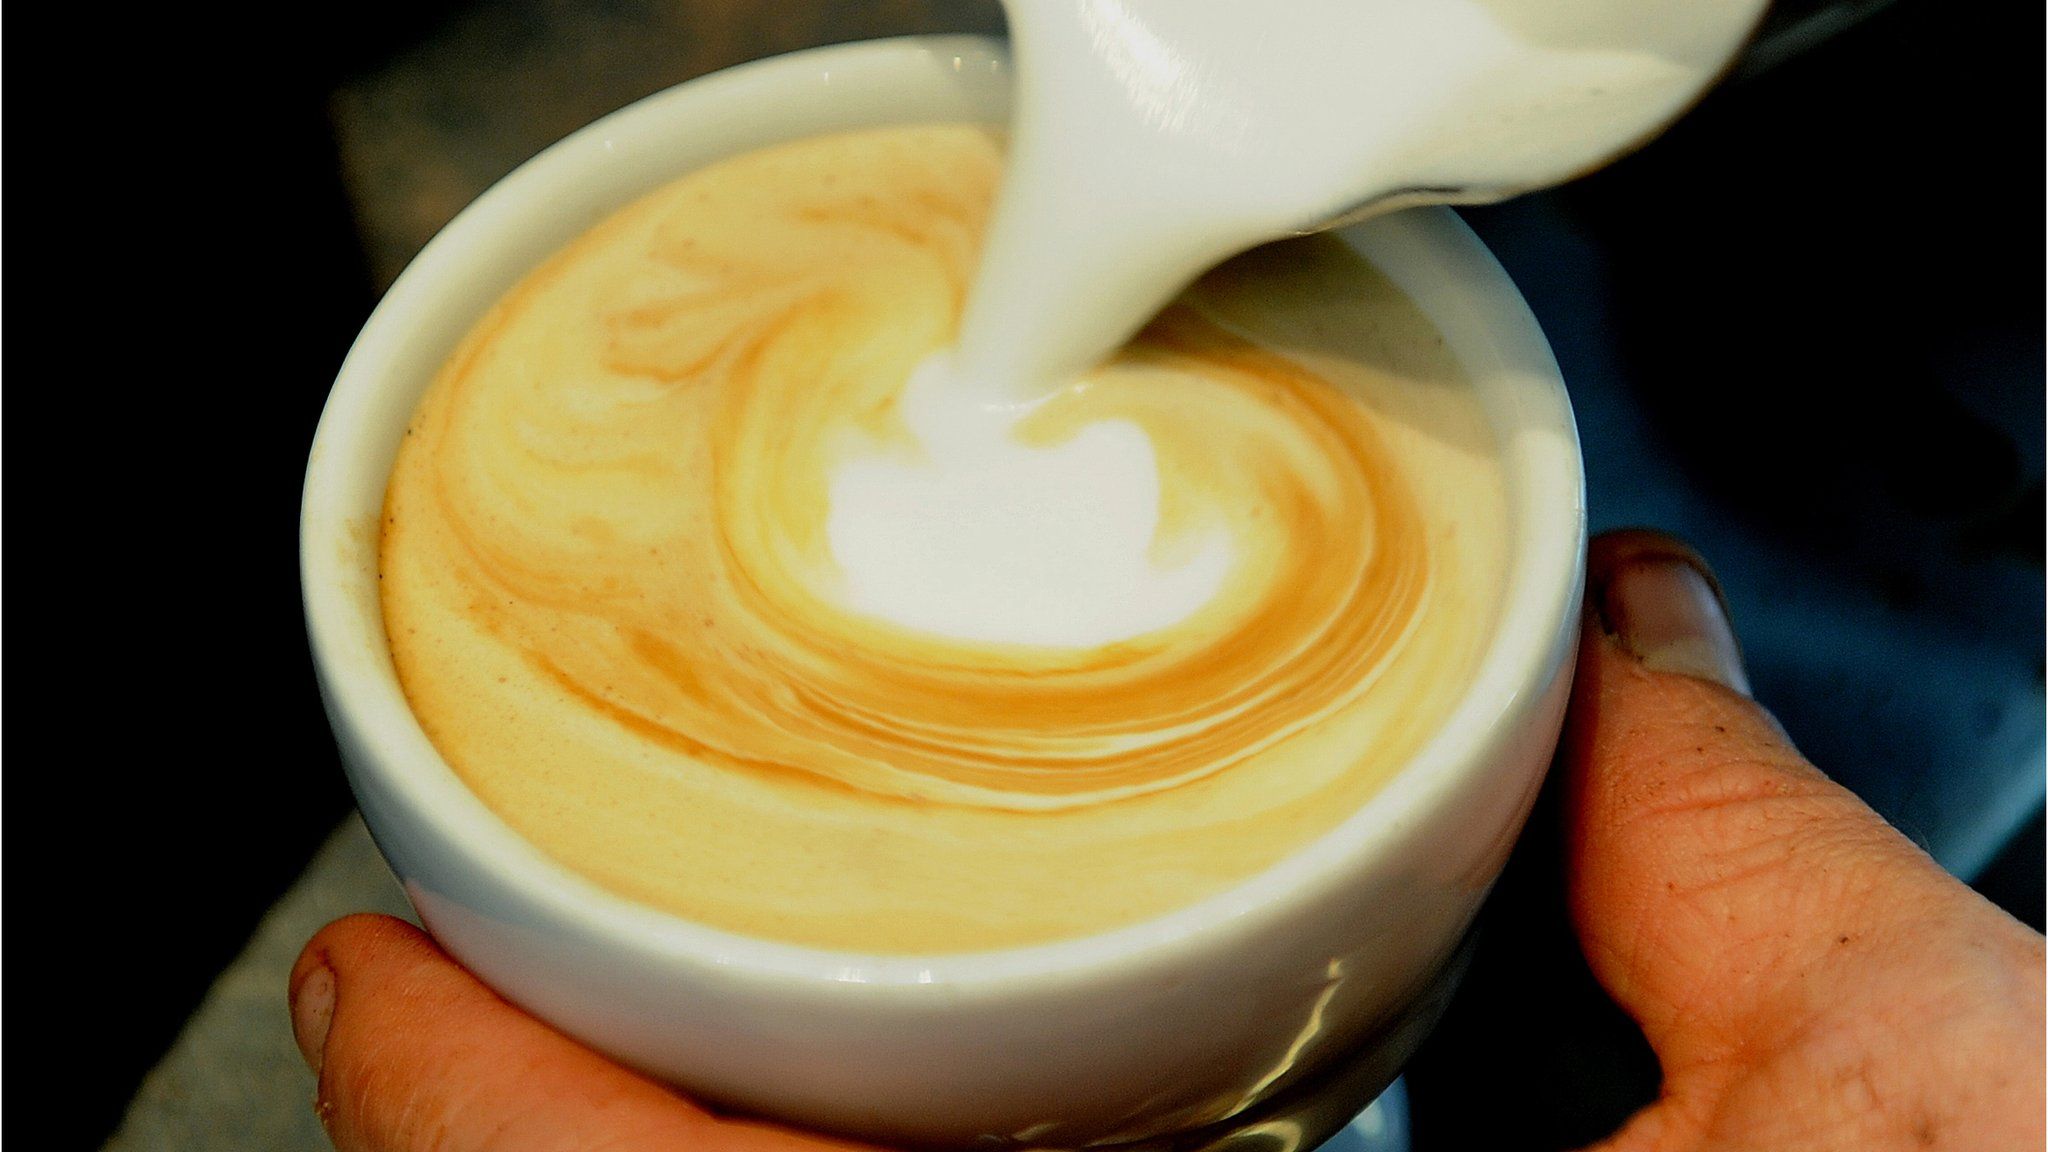 A coffee is prepared at the 'Met Cafe', one of the most popular cafes in the central business district of Sydney on April 20, 2010.